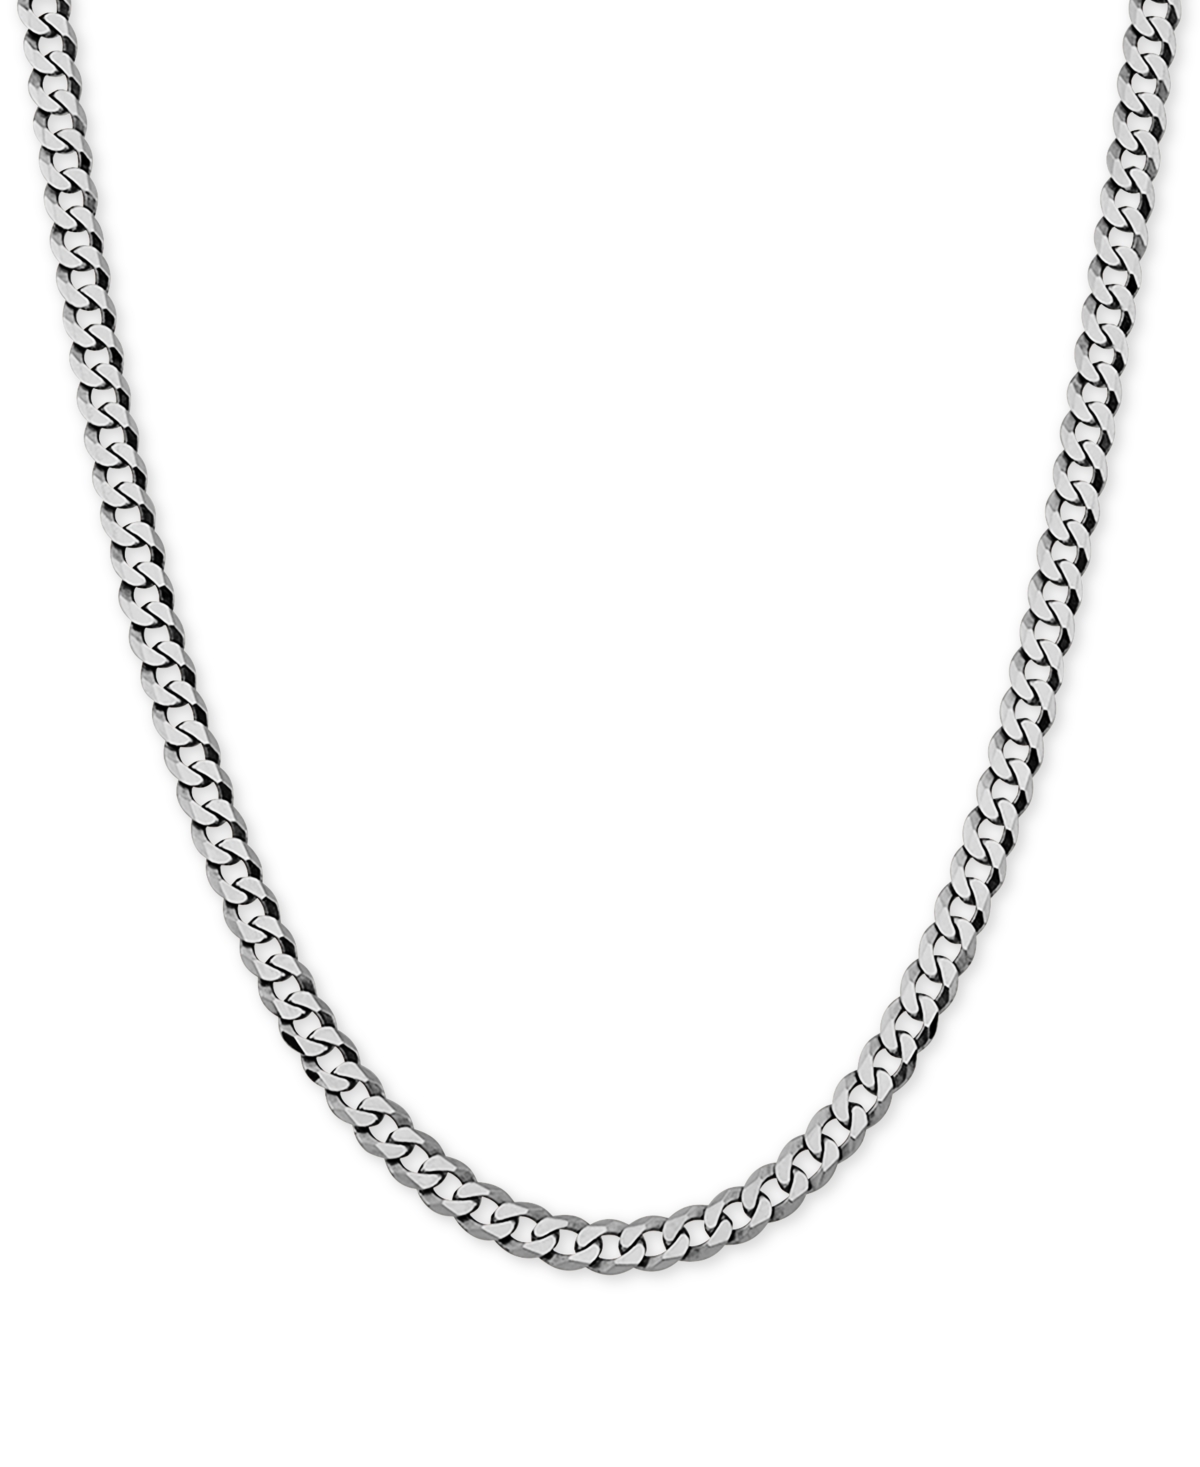 Flat Curb Link 18" Chain Necklace in Sterling Silver - Silver